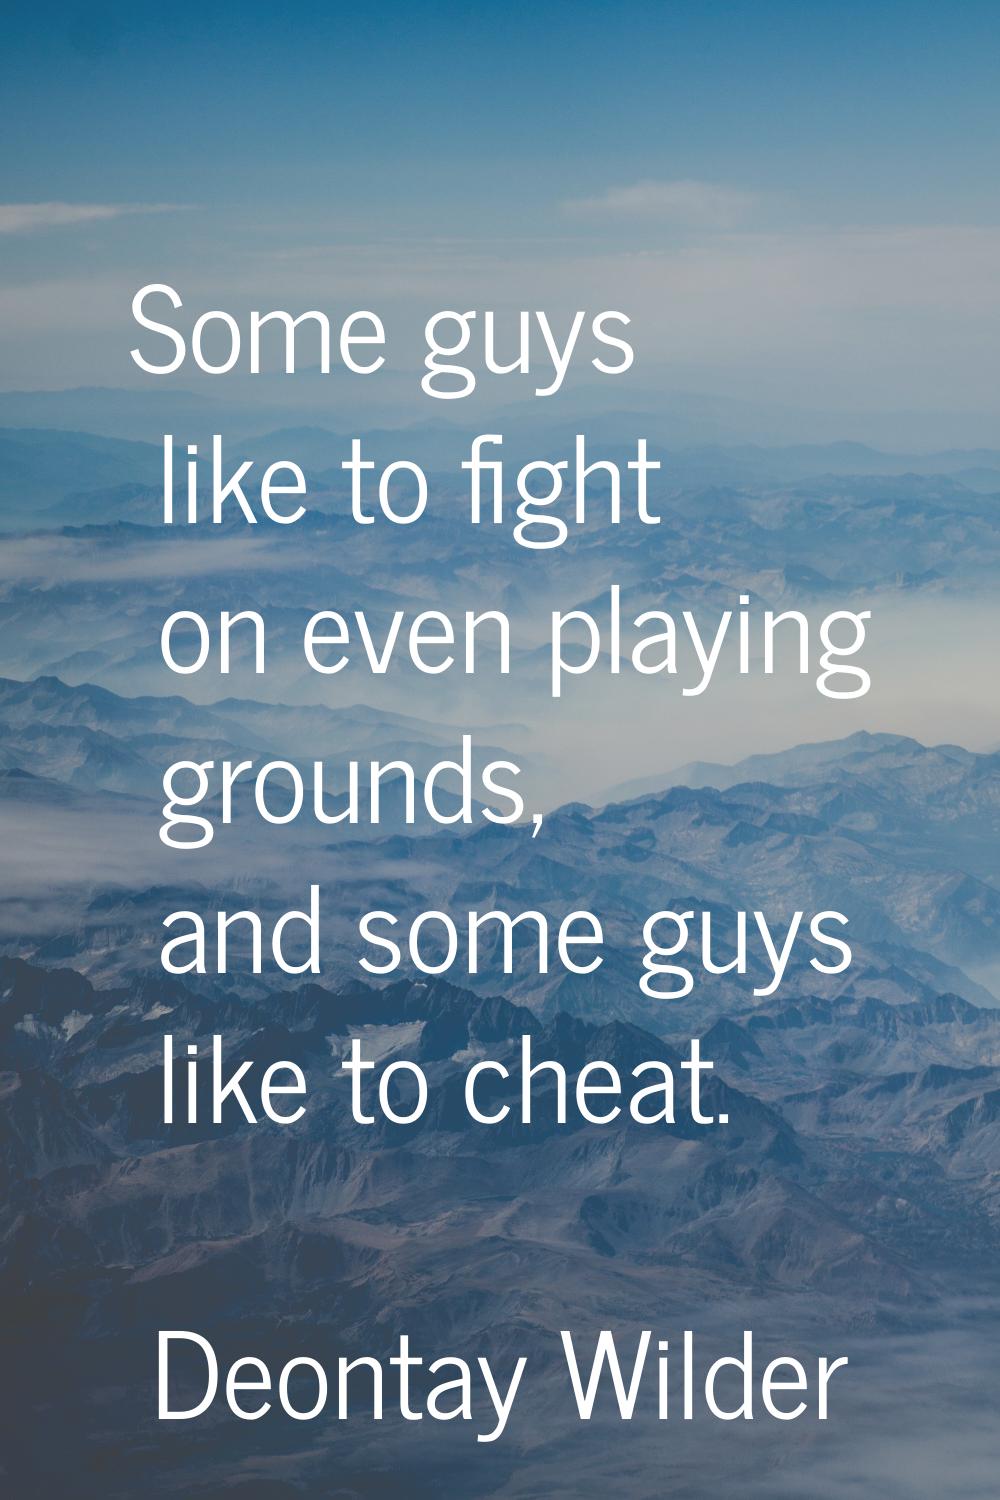 Some guys like to fight on even playing grounds, and some guys like to cheat.